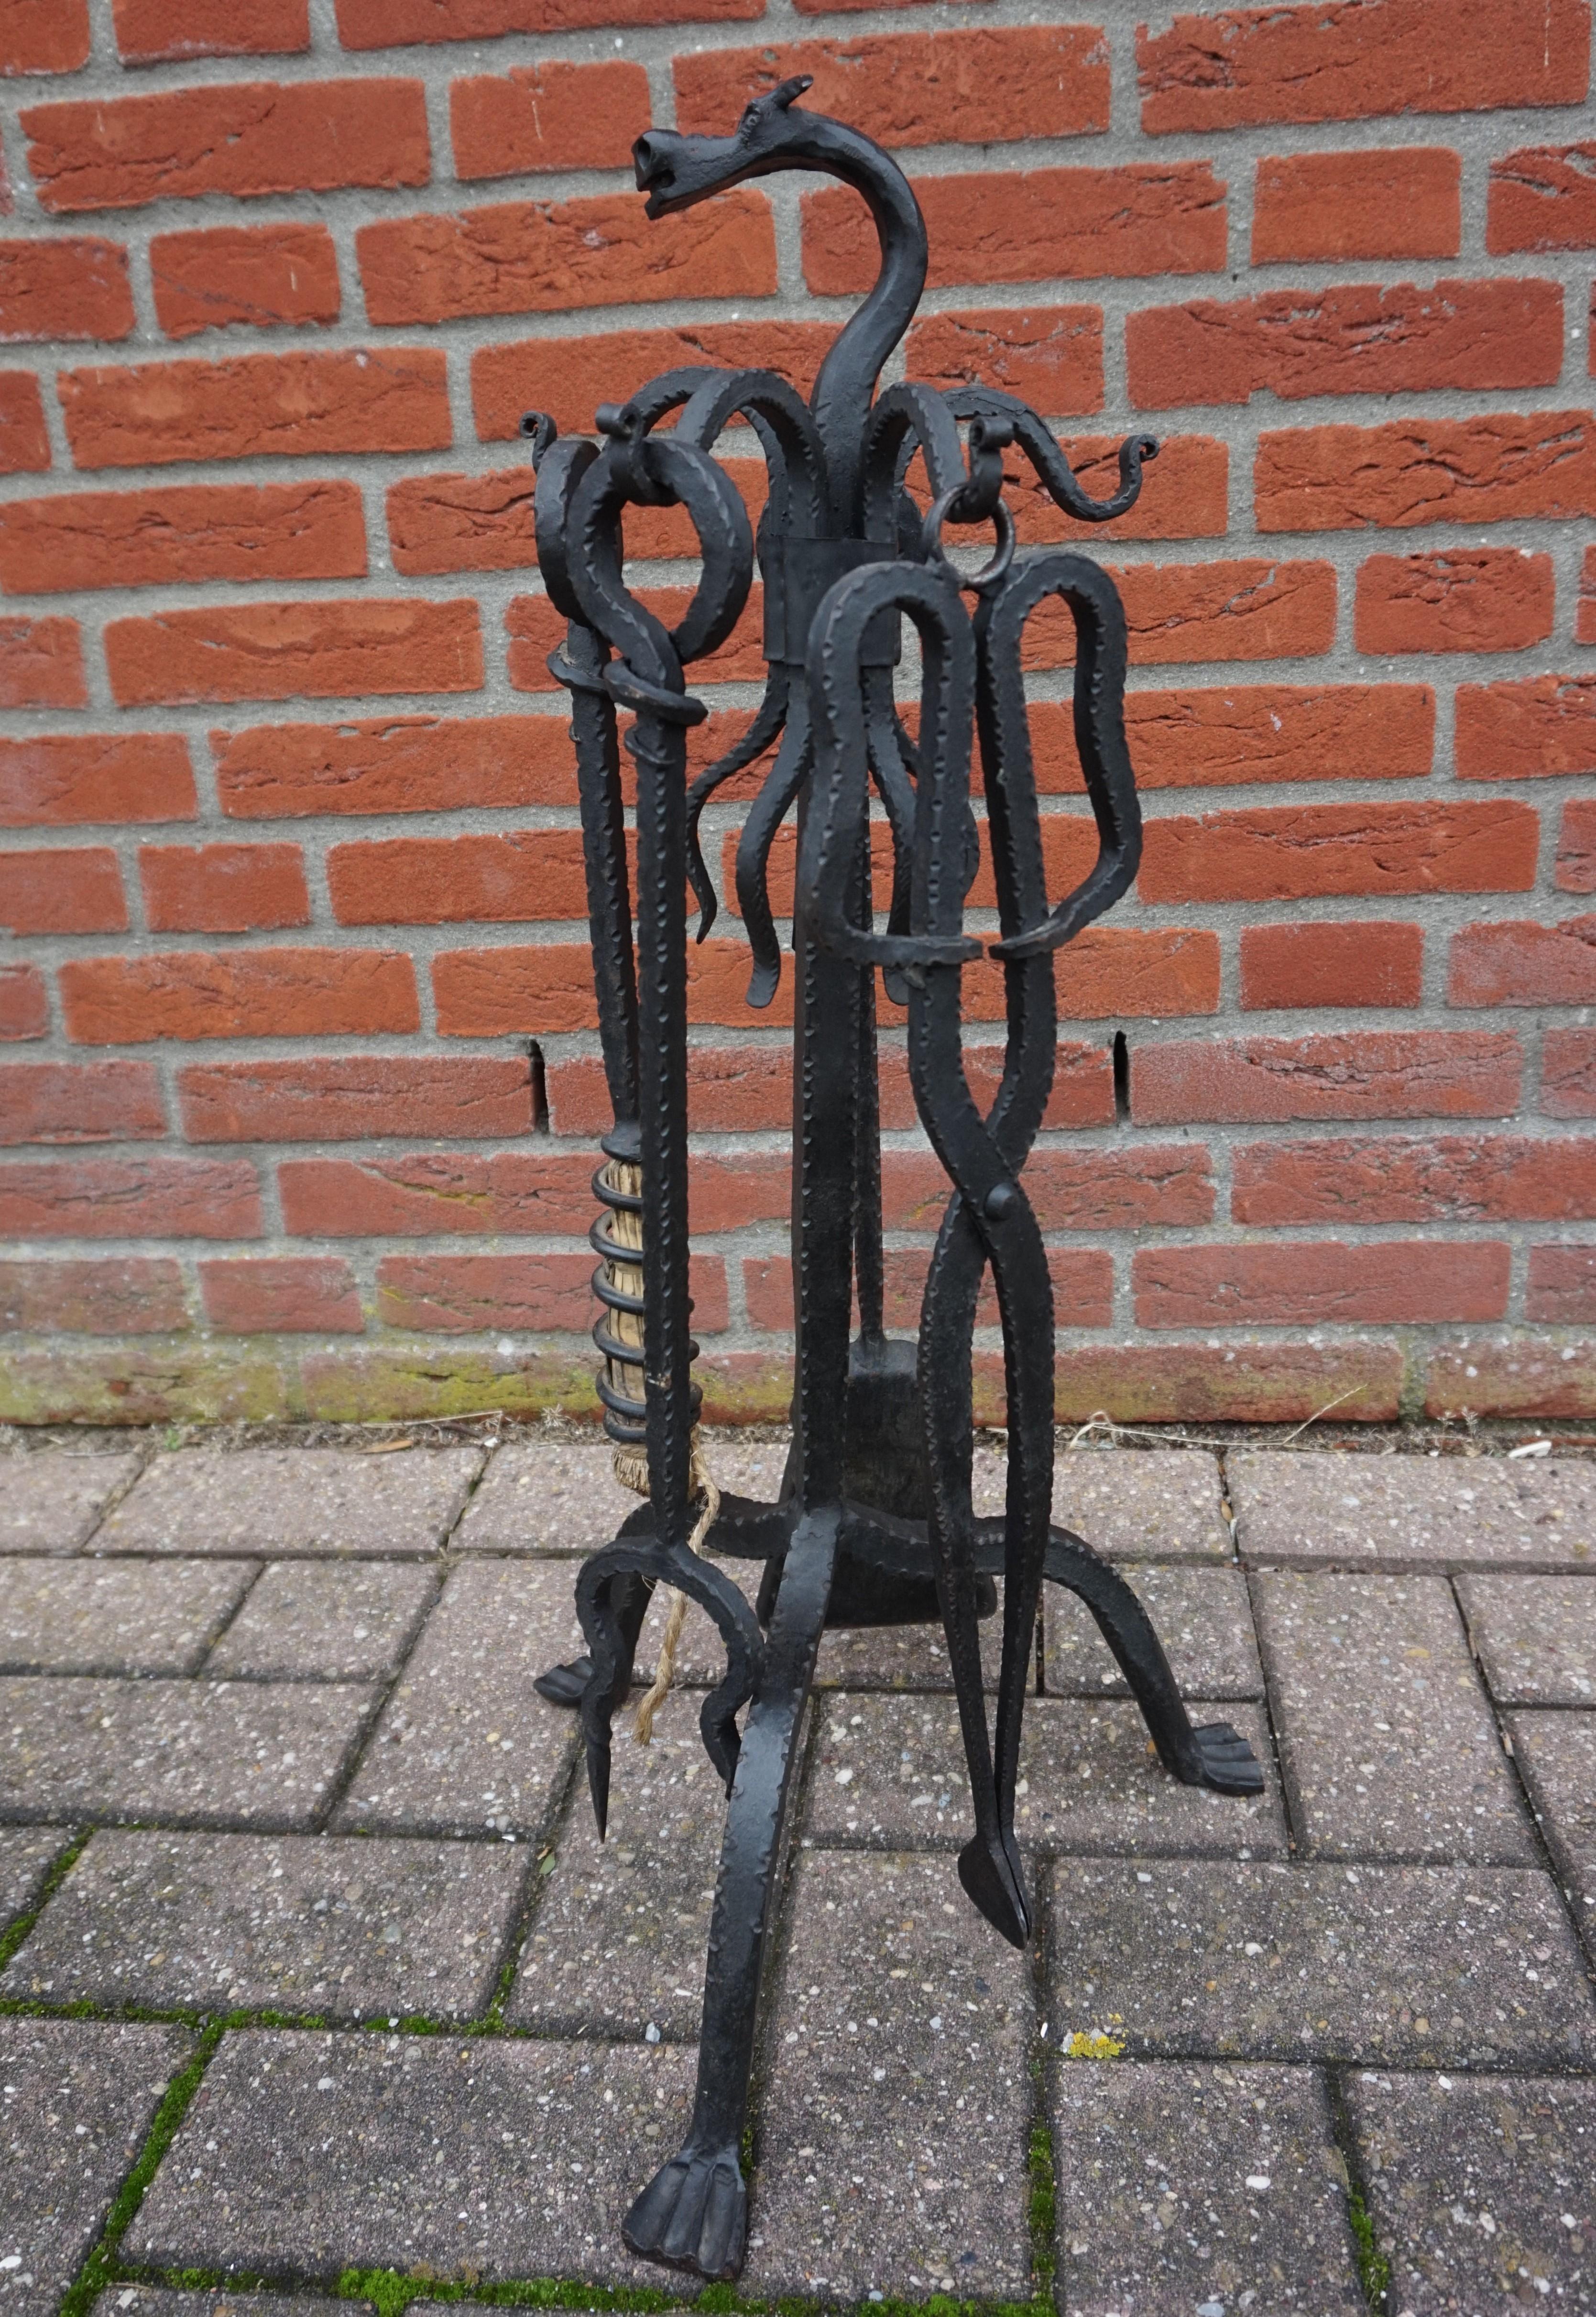 This artistic and practical wrought iron fire set will help manage the fire in your fireplace.

If you are passionate about artistic and handcrafted antiques than this fireplace set from the Arts & Crafts era could be yours to own and enjoy soon.